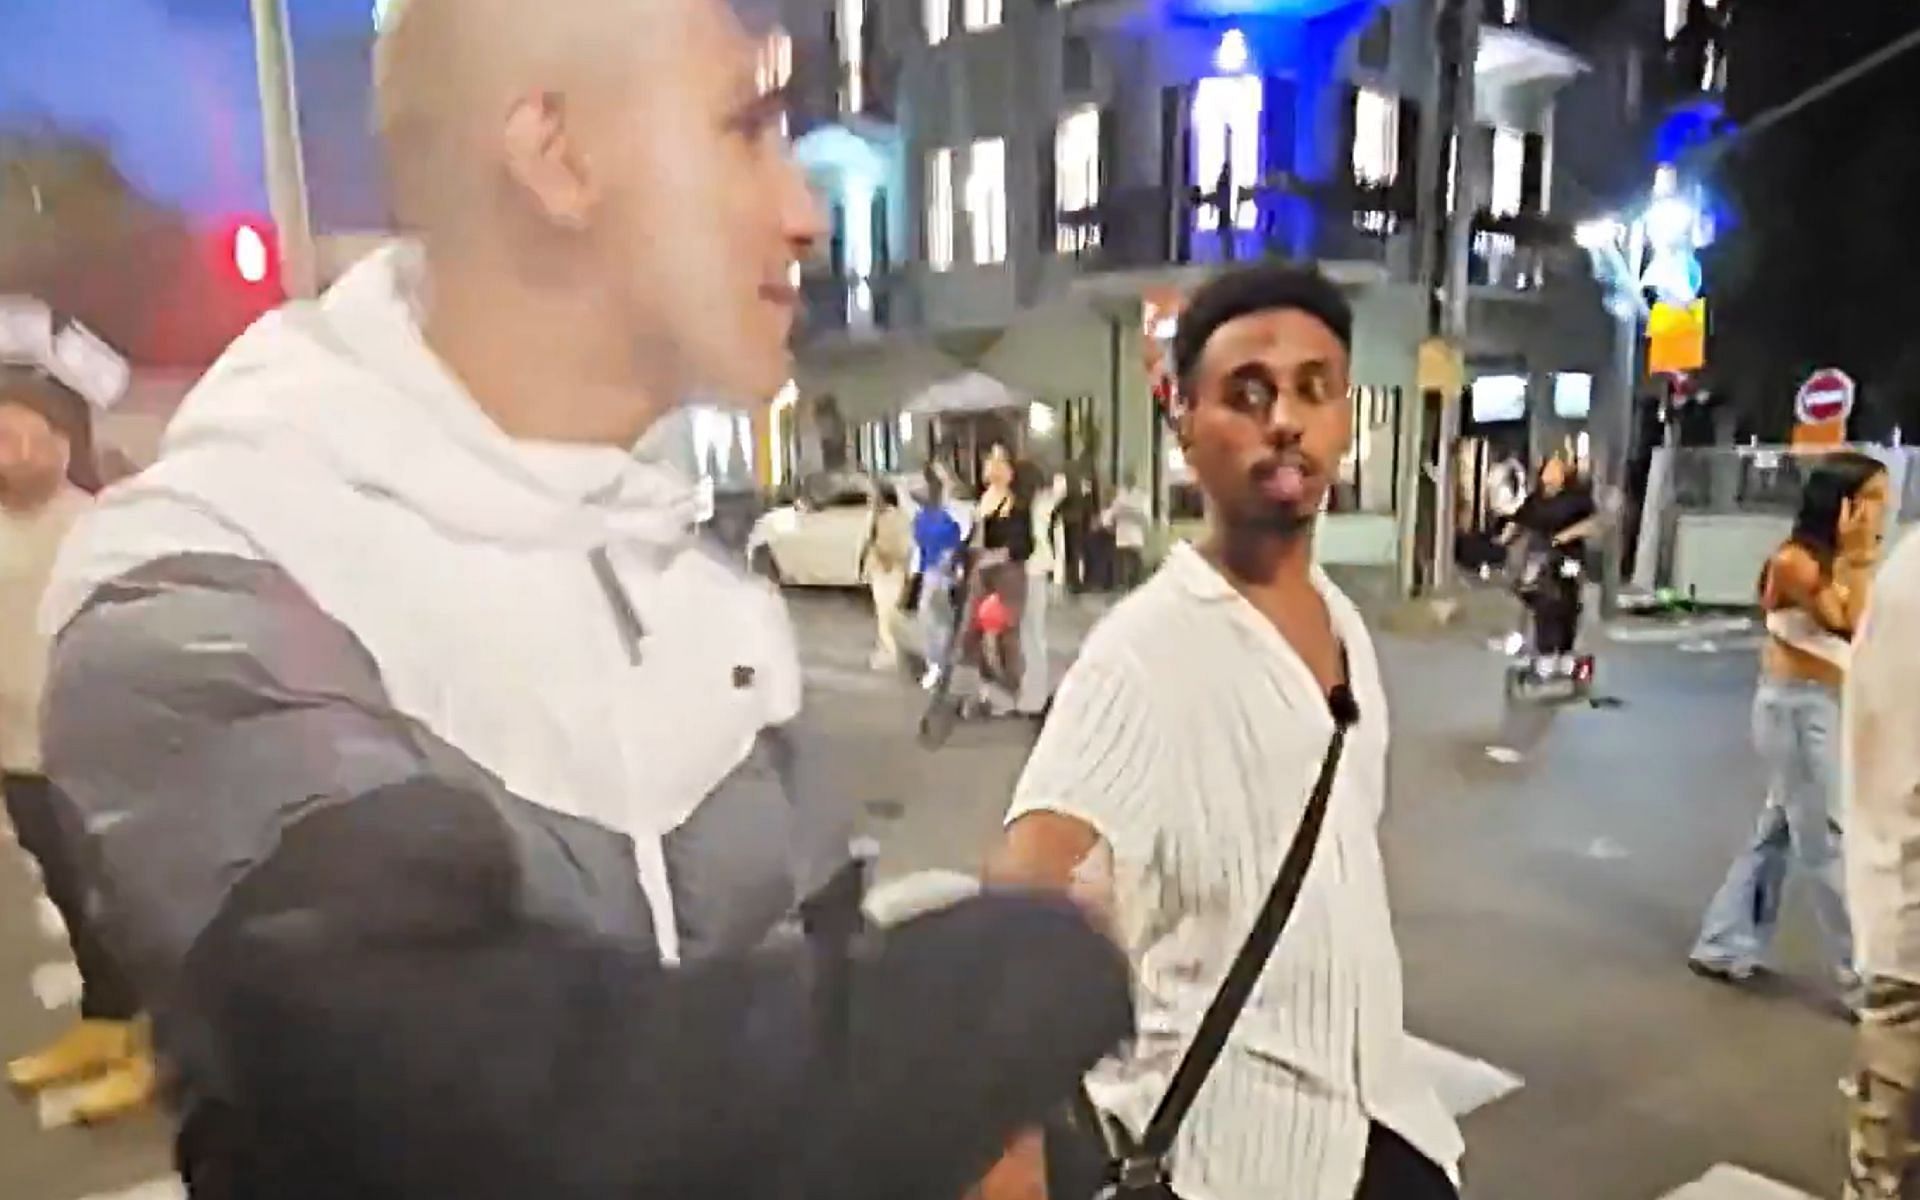 Controversial streamer Johnny Somali assaulted in Israel after getting accused of &quot;snitching&quot;